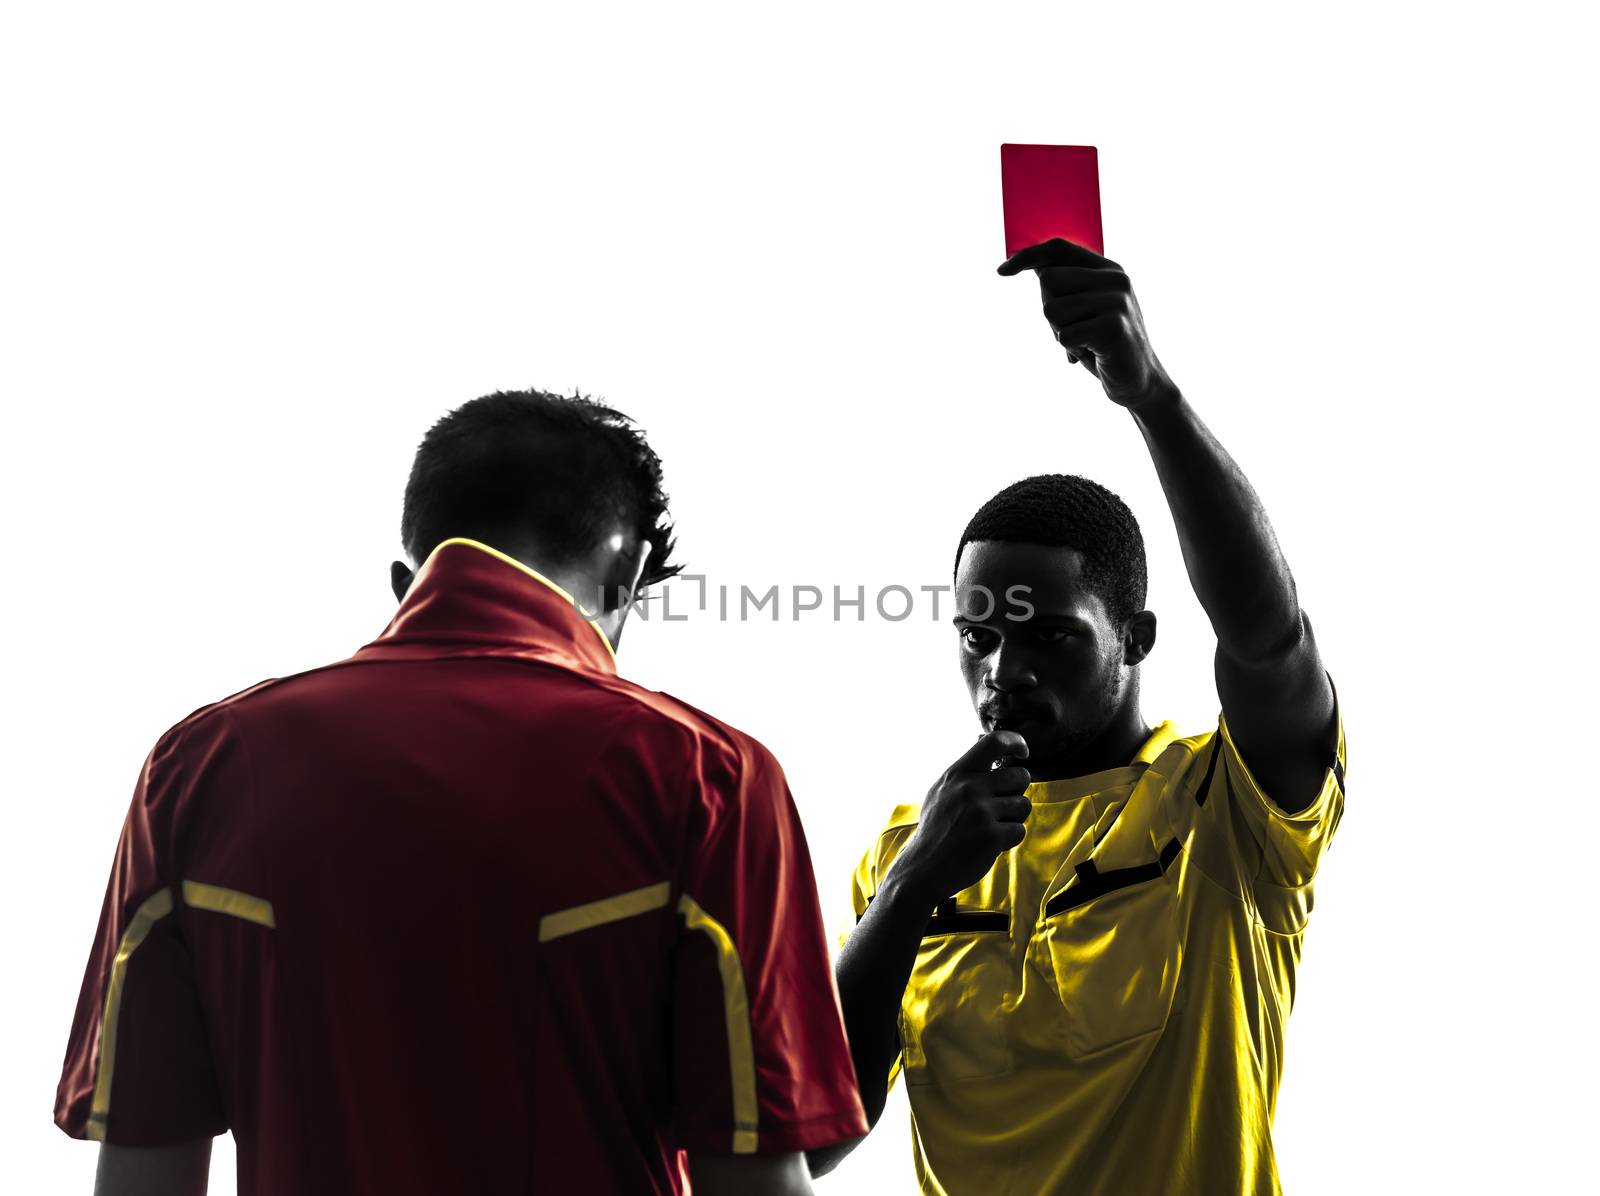 two men soccer player and referee showing red card in silhouette  on white background